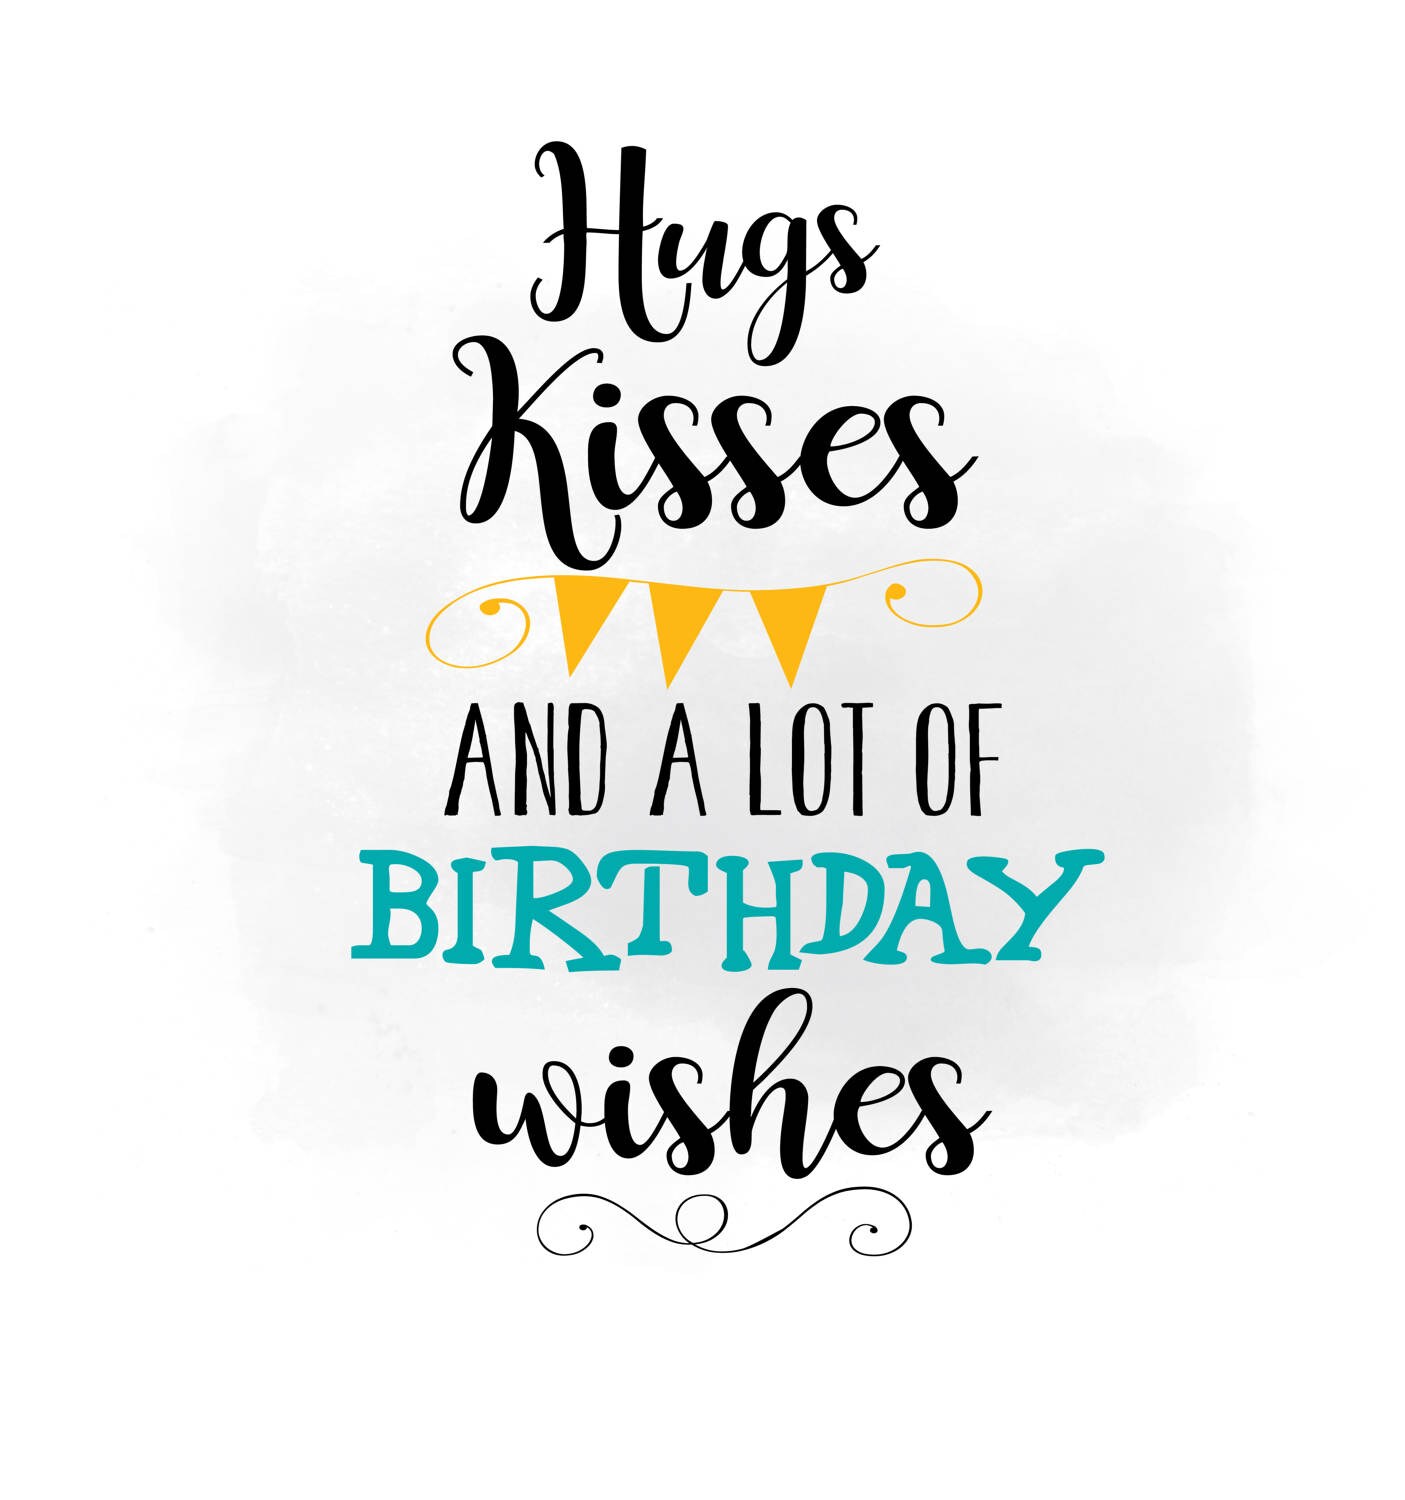 Hugs Kisses Birthday wishes SVG clipart Birthday Quote Word